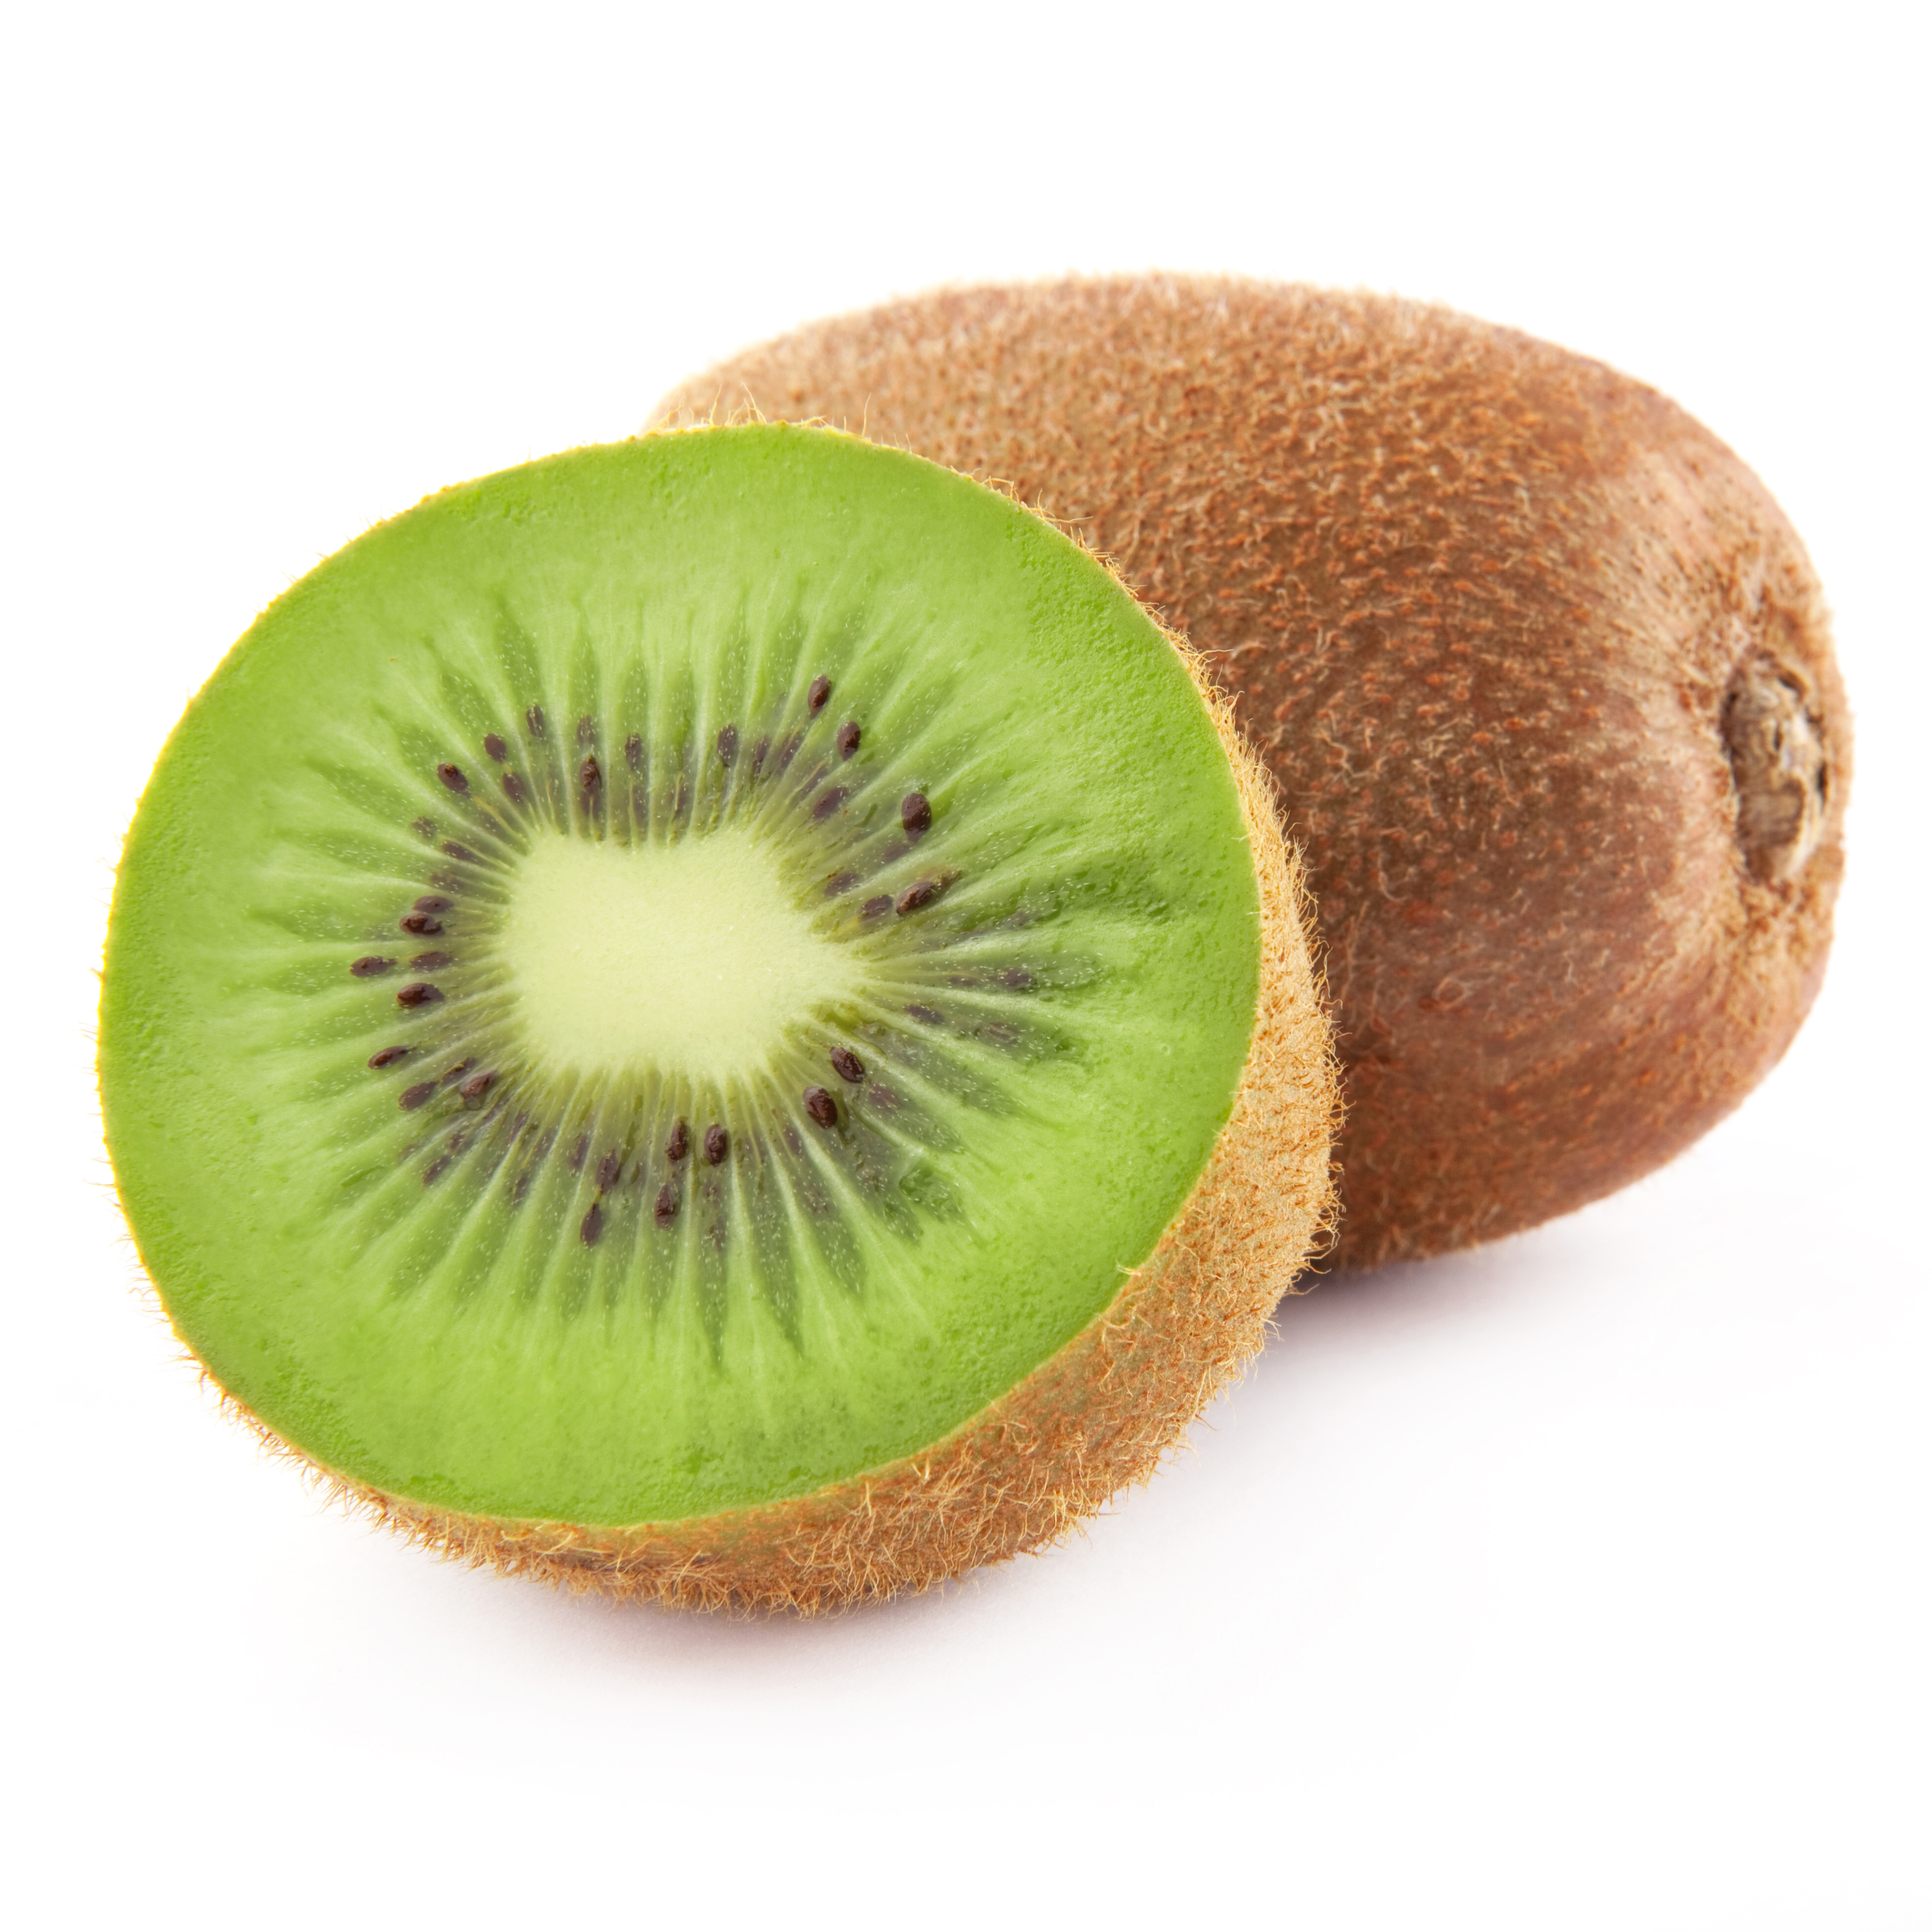 Kiwis the most interesting low sugar fruit to eat on a low carb diet.